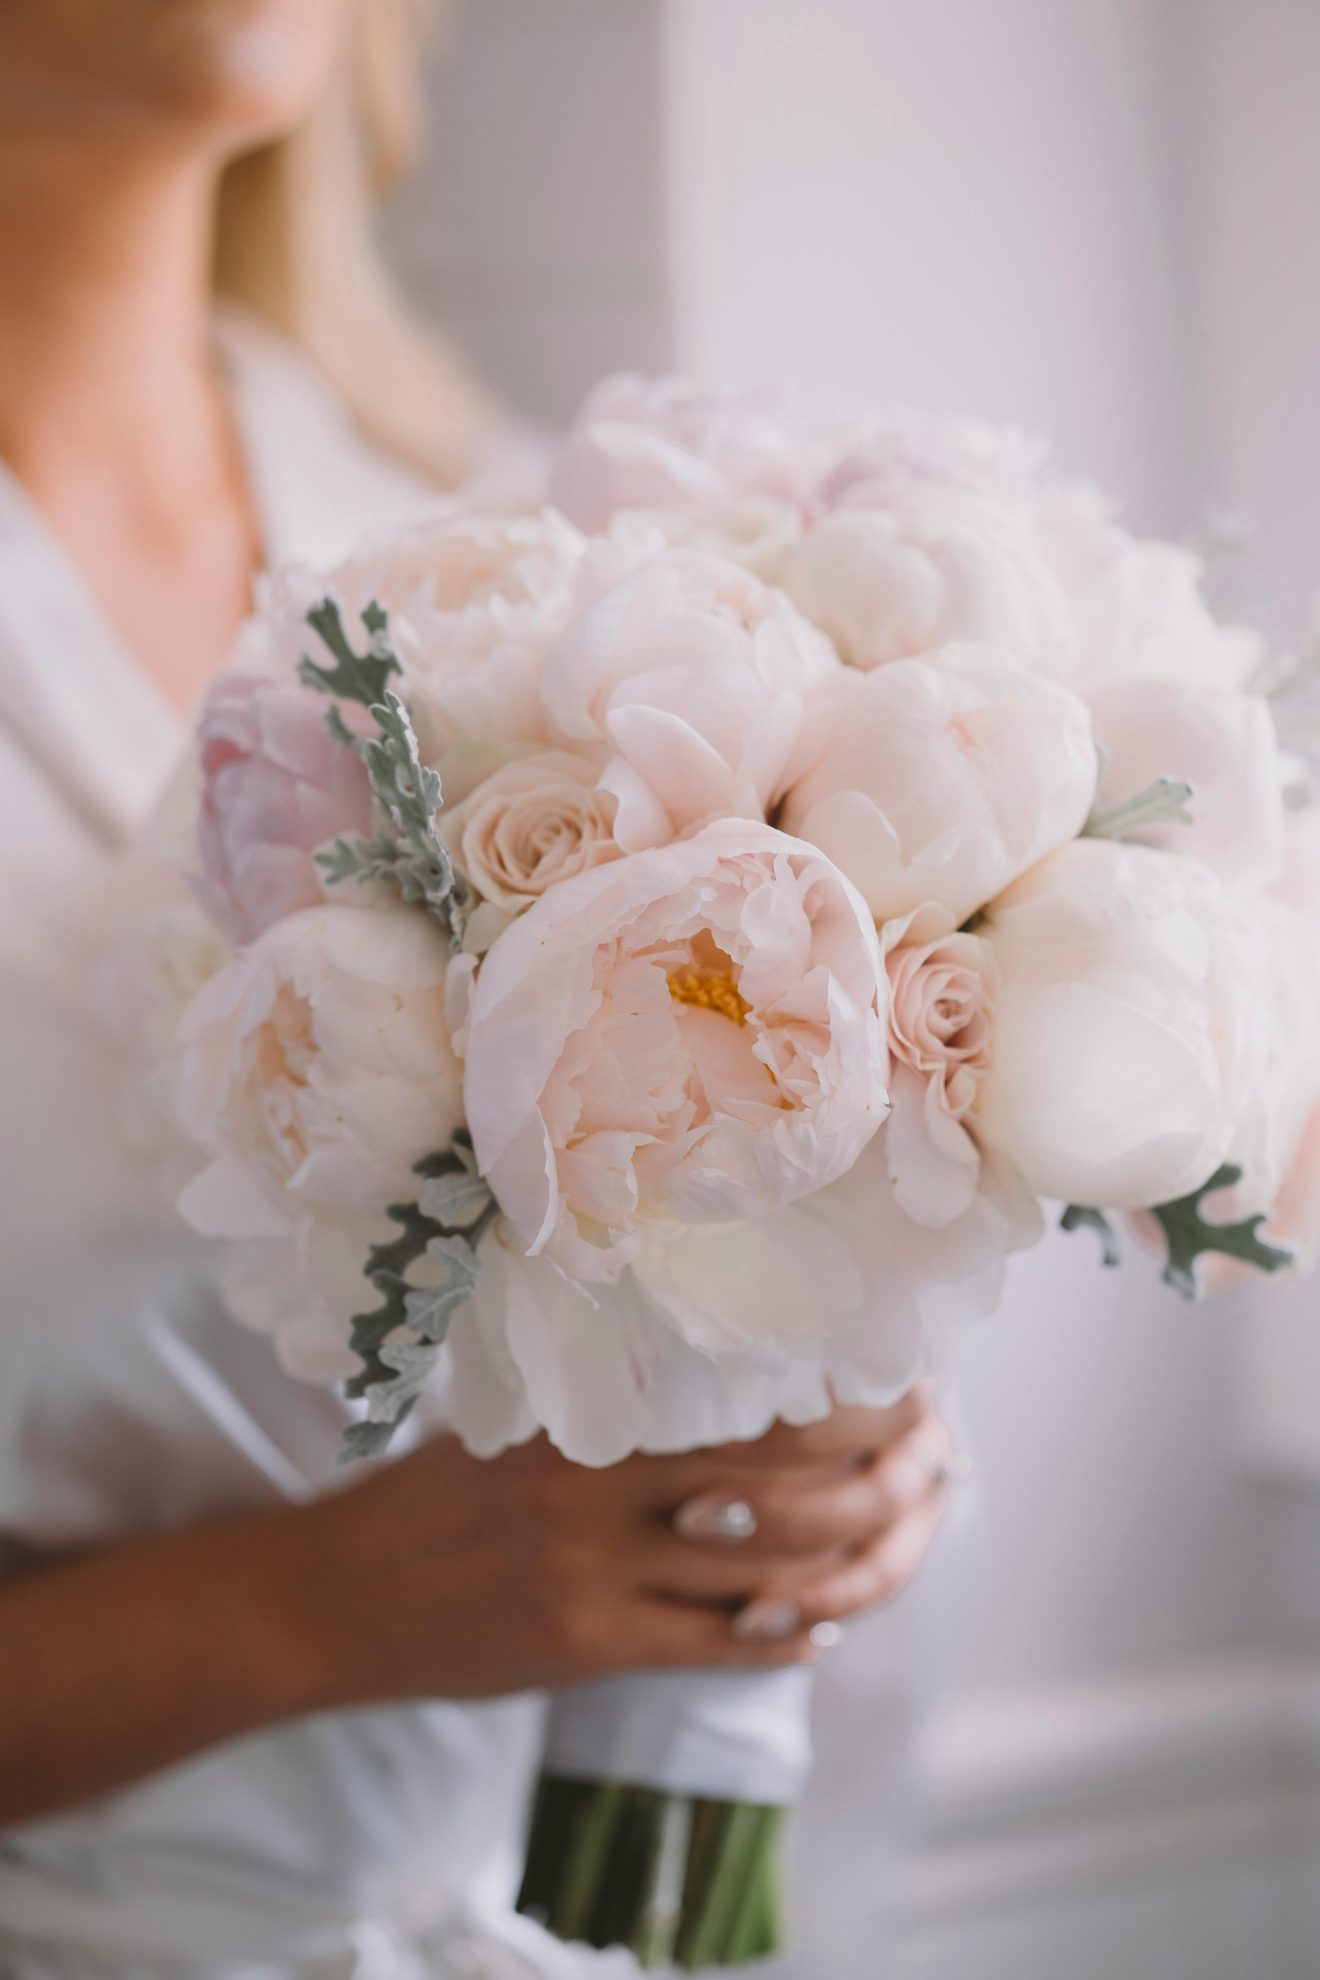 A bride holding a bouquet of peonies